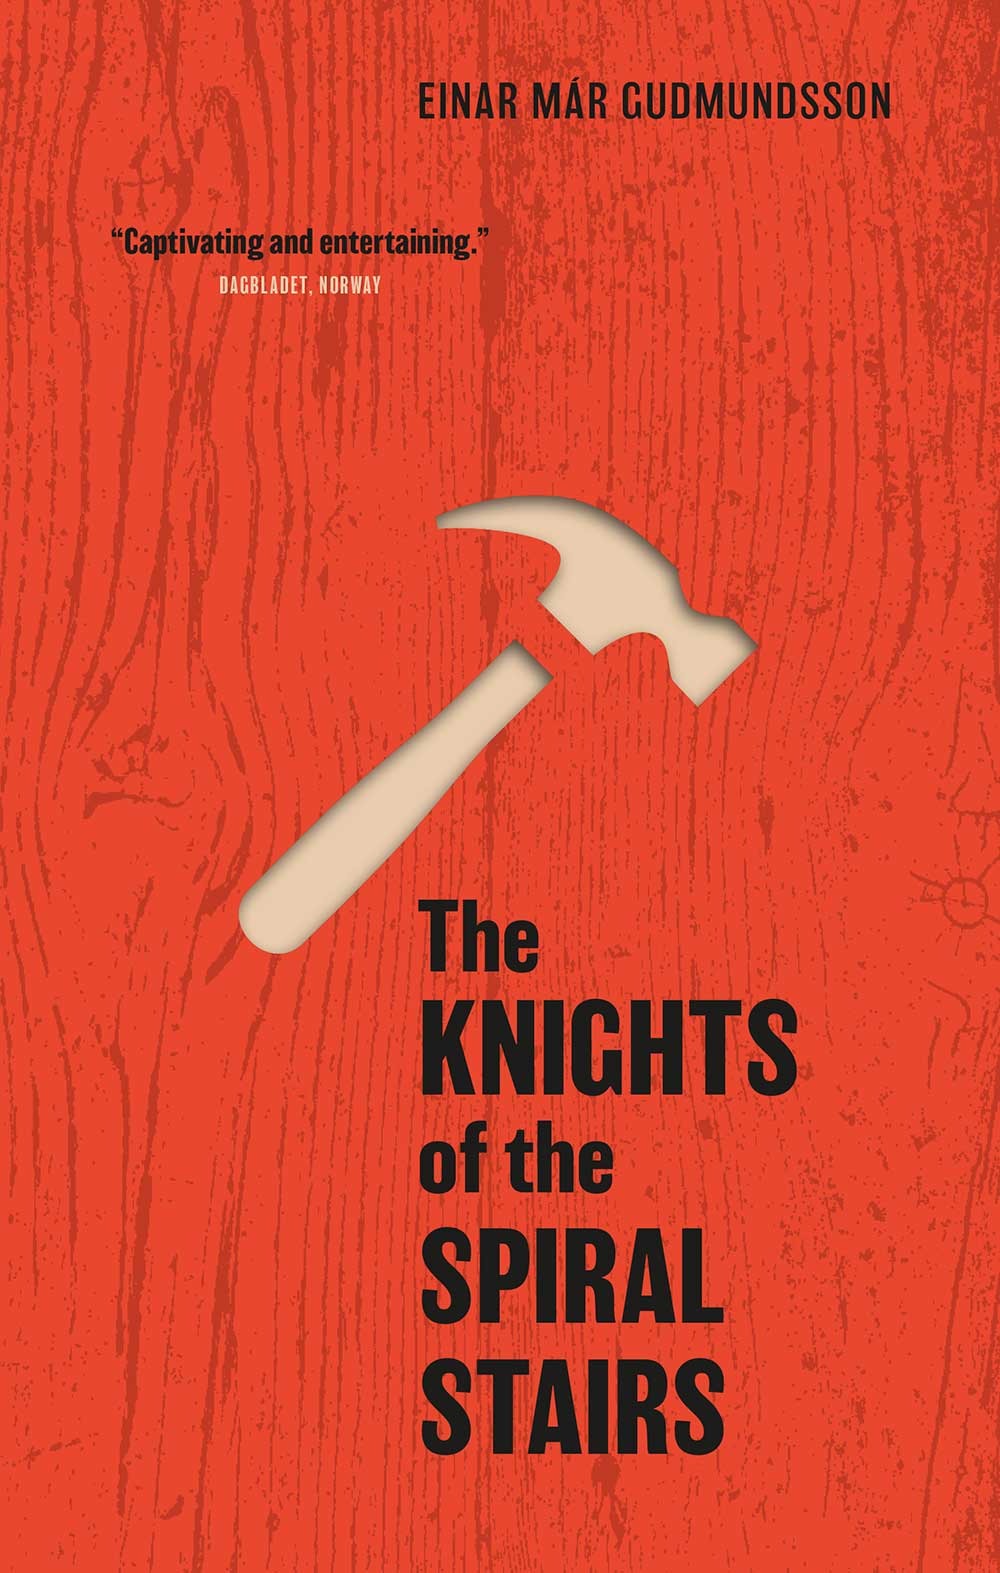 The Knights of the Spiral Stairs